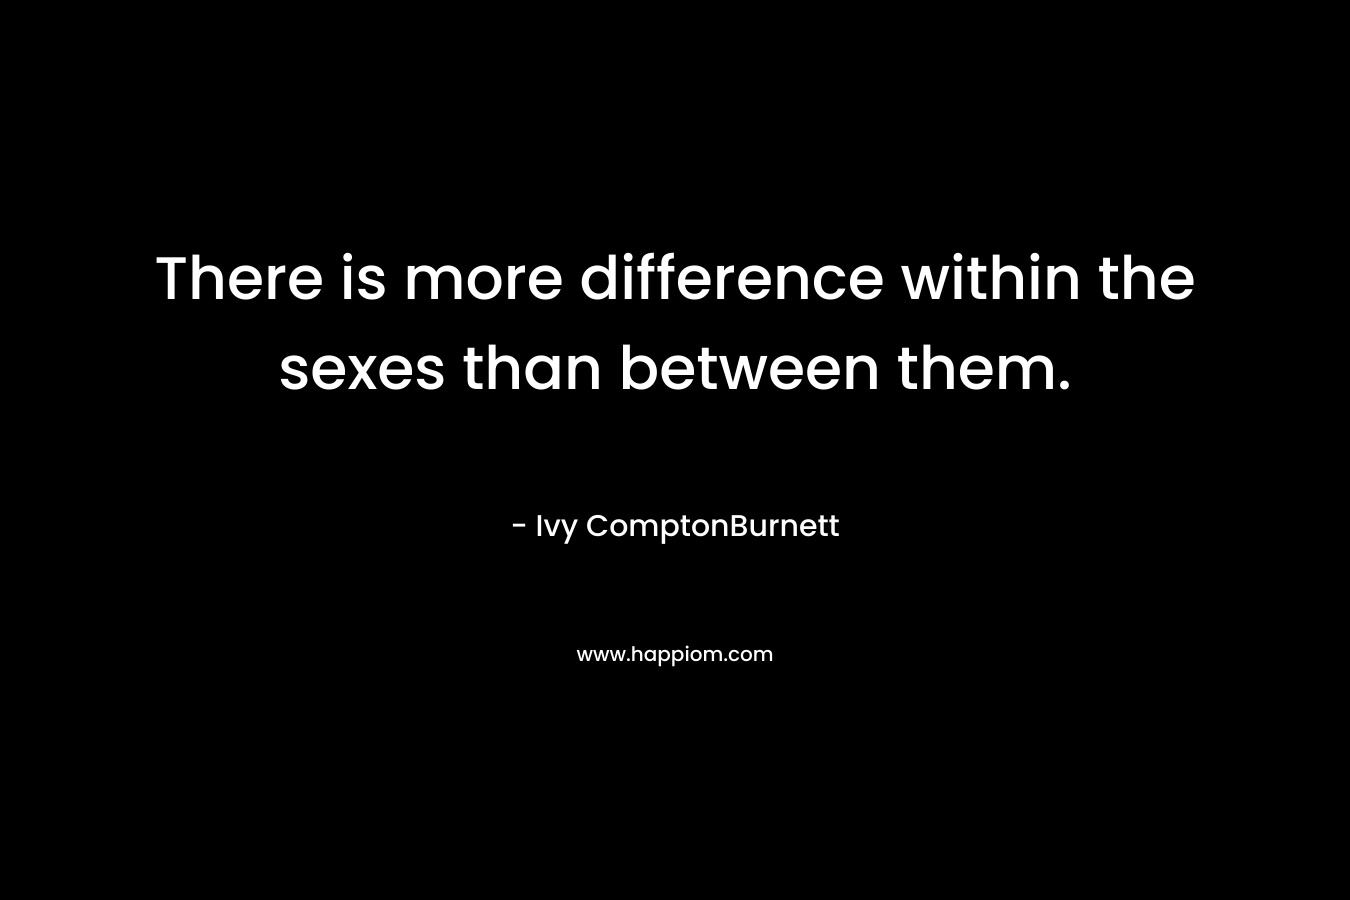 There is more difference within the sexes than between them. – Ivy ComptonBurnett